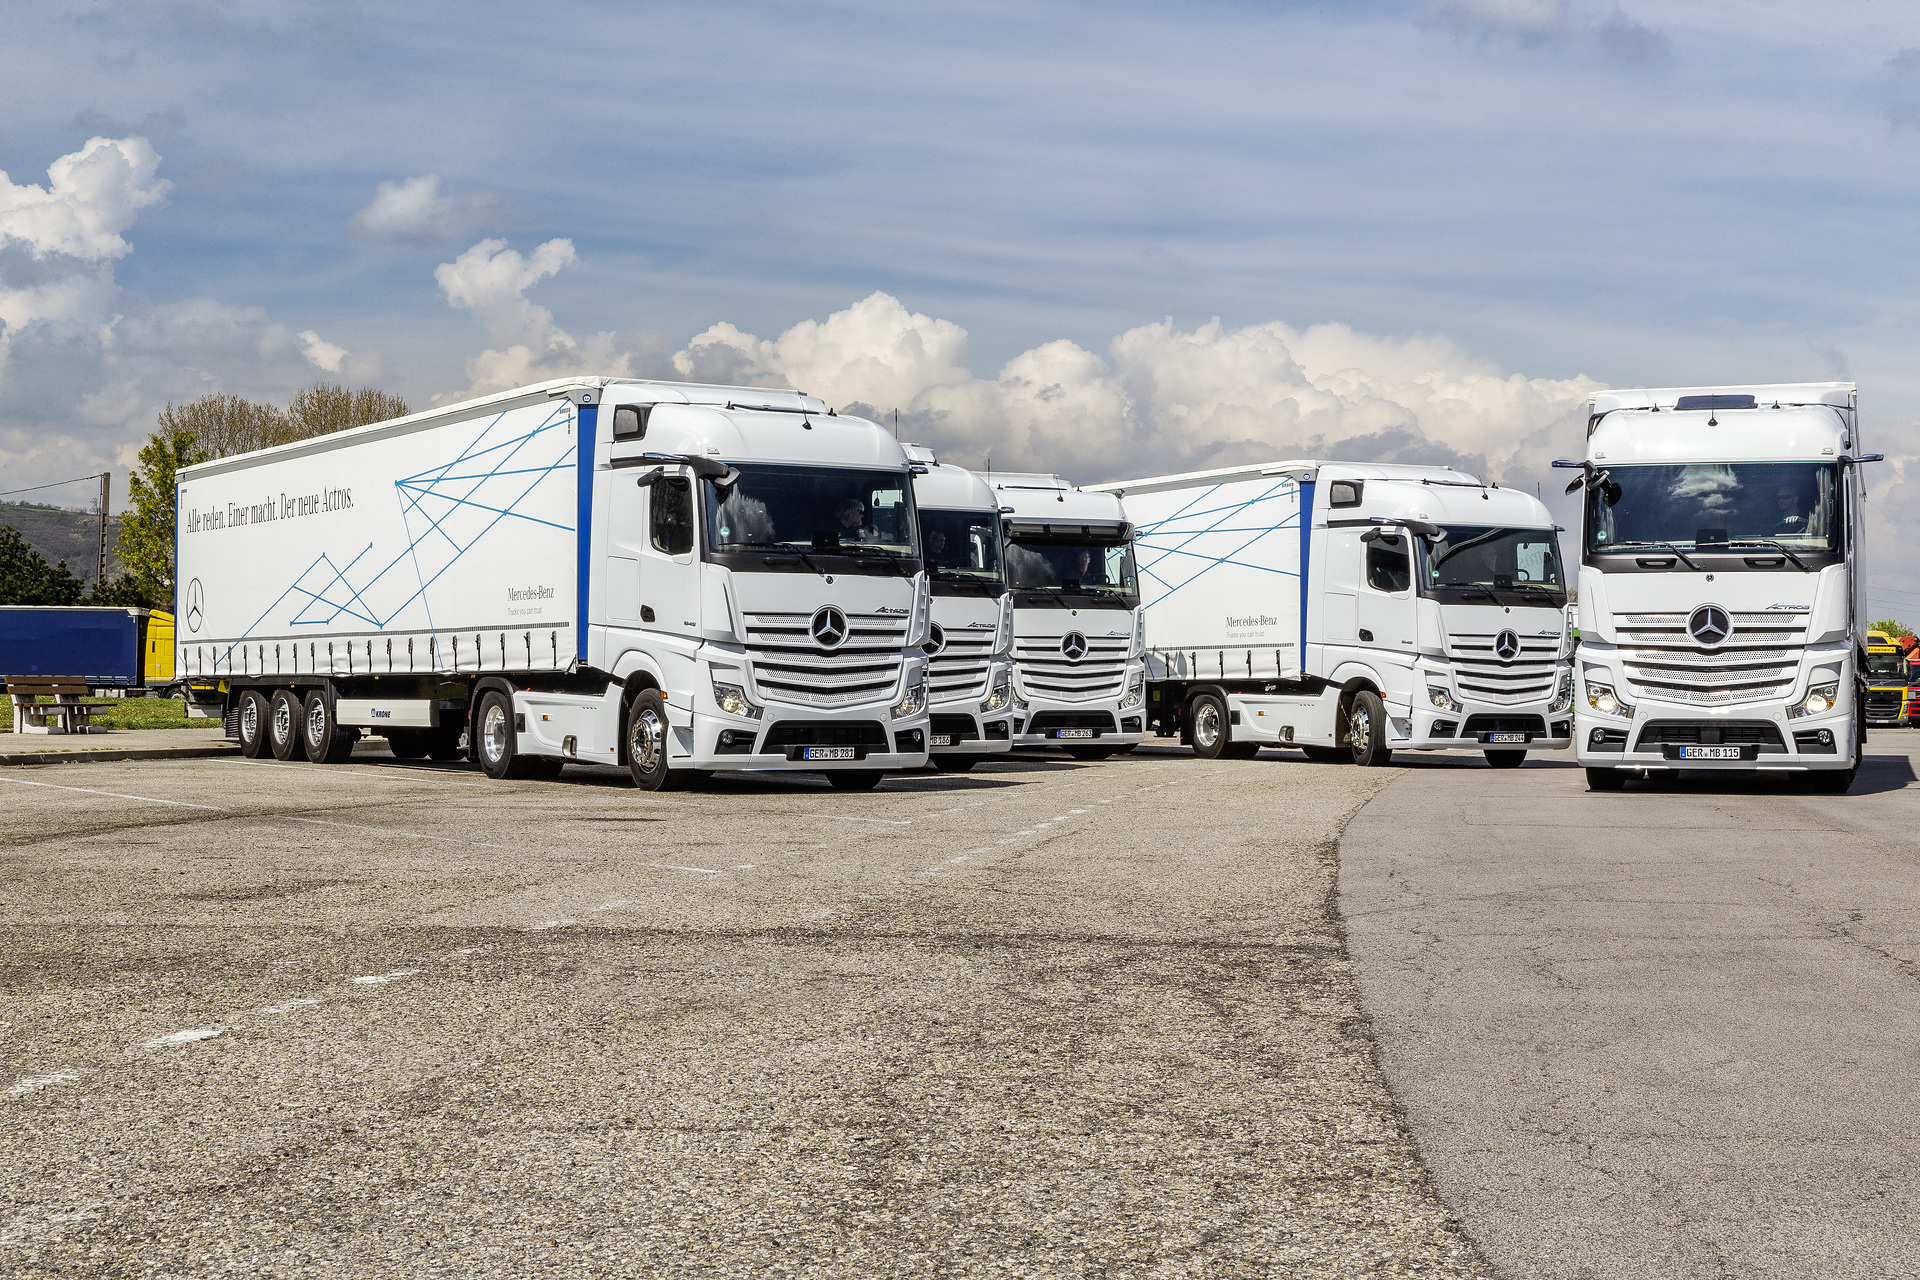 Mercedes-Benz Actros with Active Brake Assist 5 and Sideguard Assist, Active Drive Assist, MirrorCam